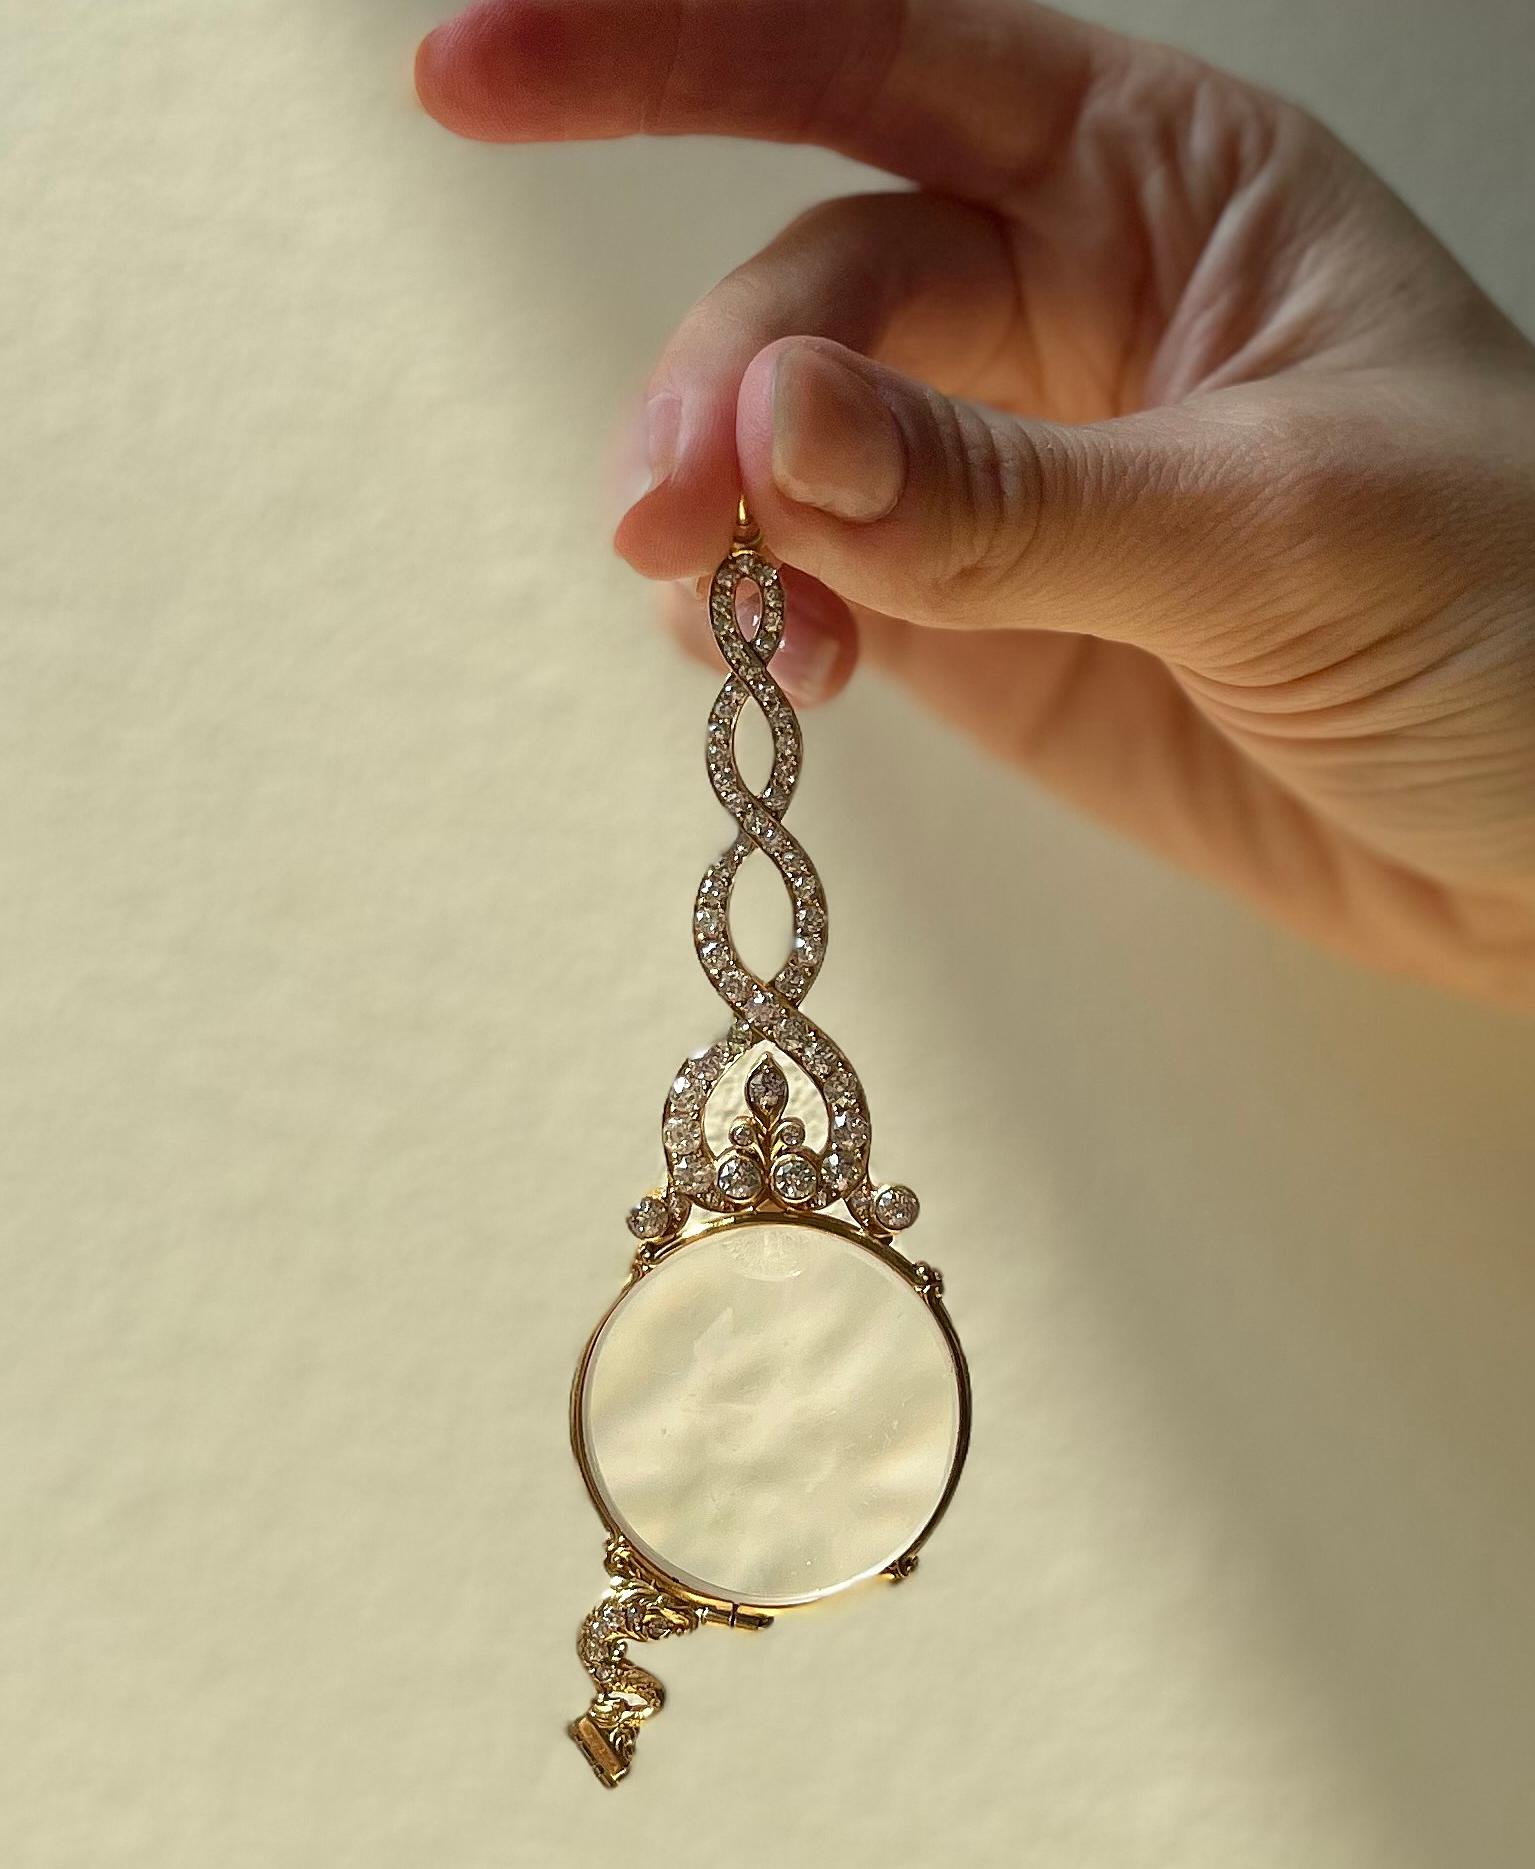 Antique 18k gold lorgnette, adorned with approx. 3.50ctw in H/VS-Si diamonds. The piece can be worn as a pendant. Measures 4.5